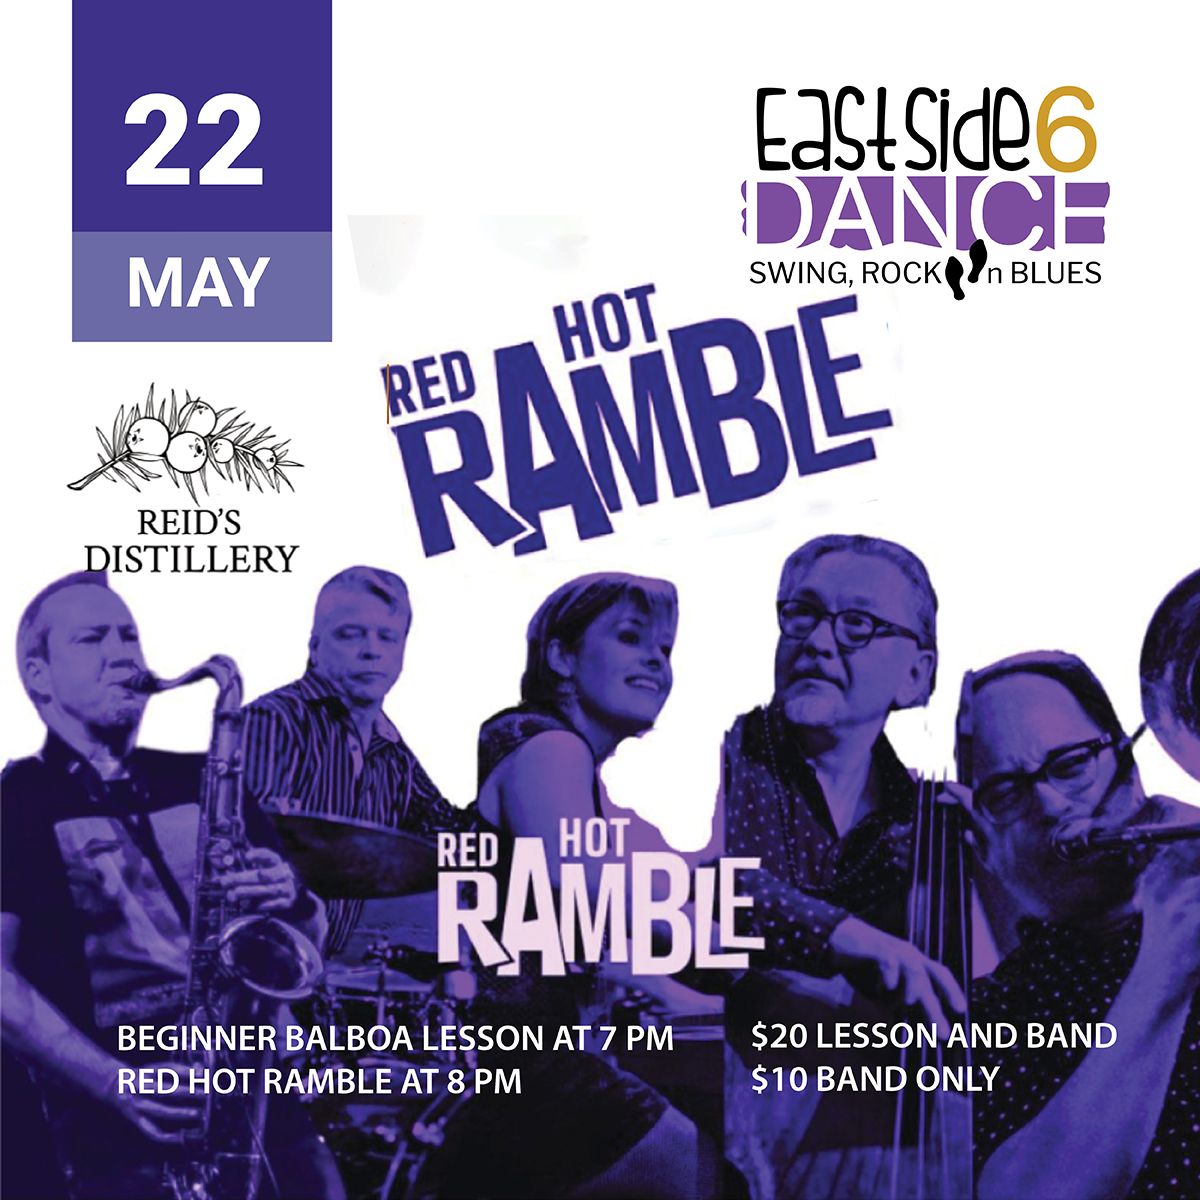 Red Hot Ramble with East Side 6 Dance - Reid's Concert Series